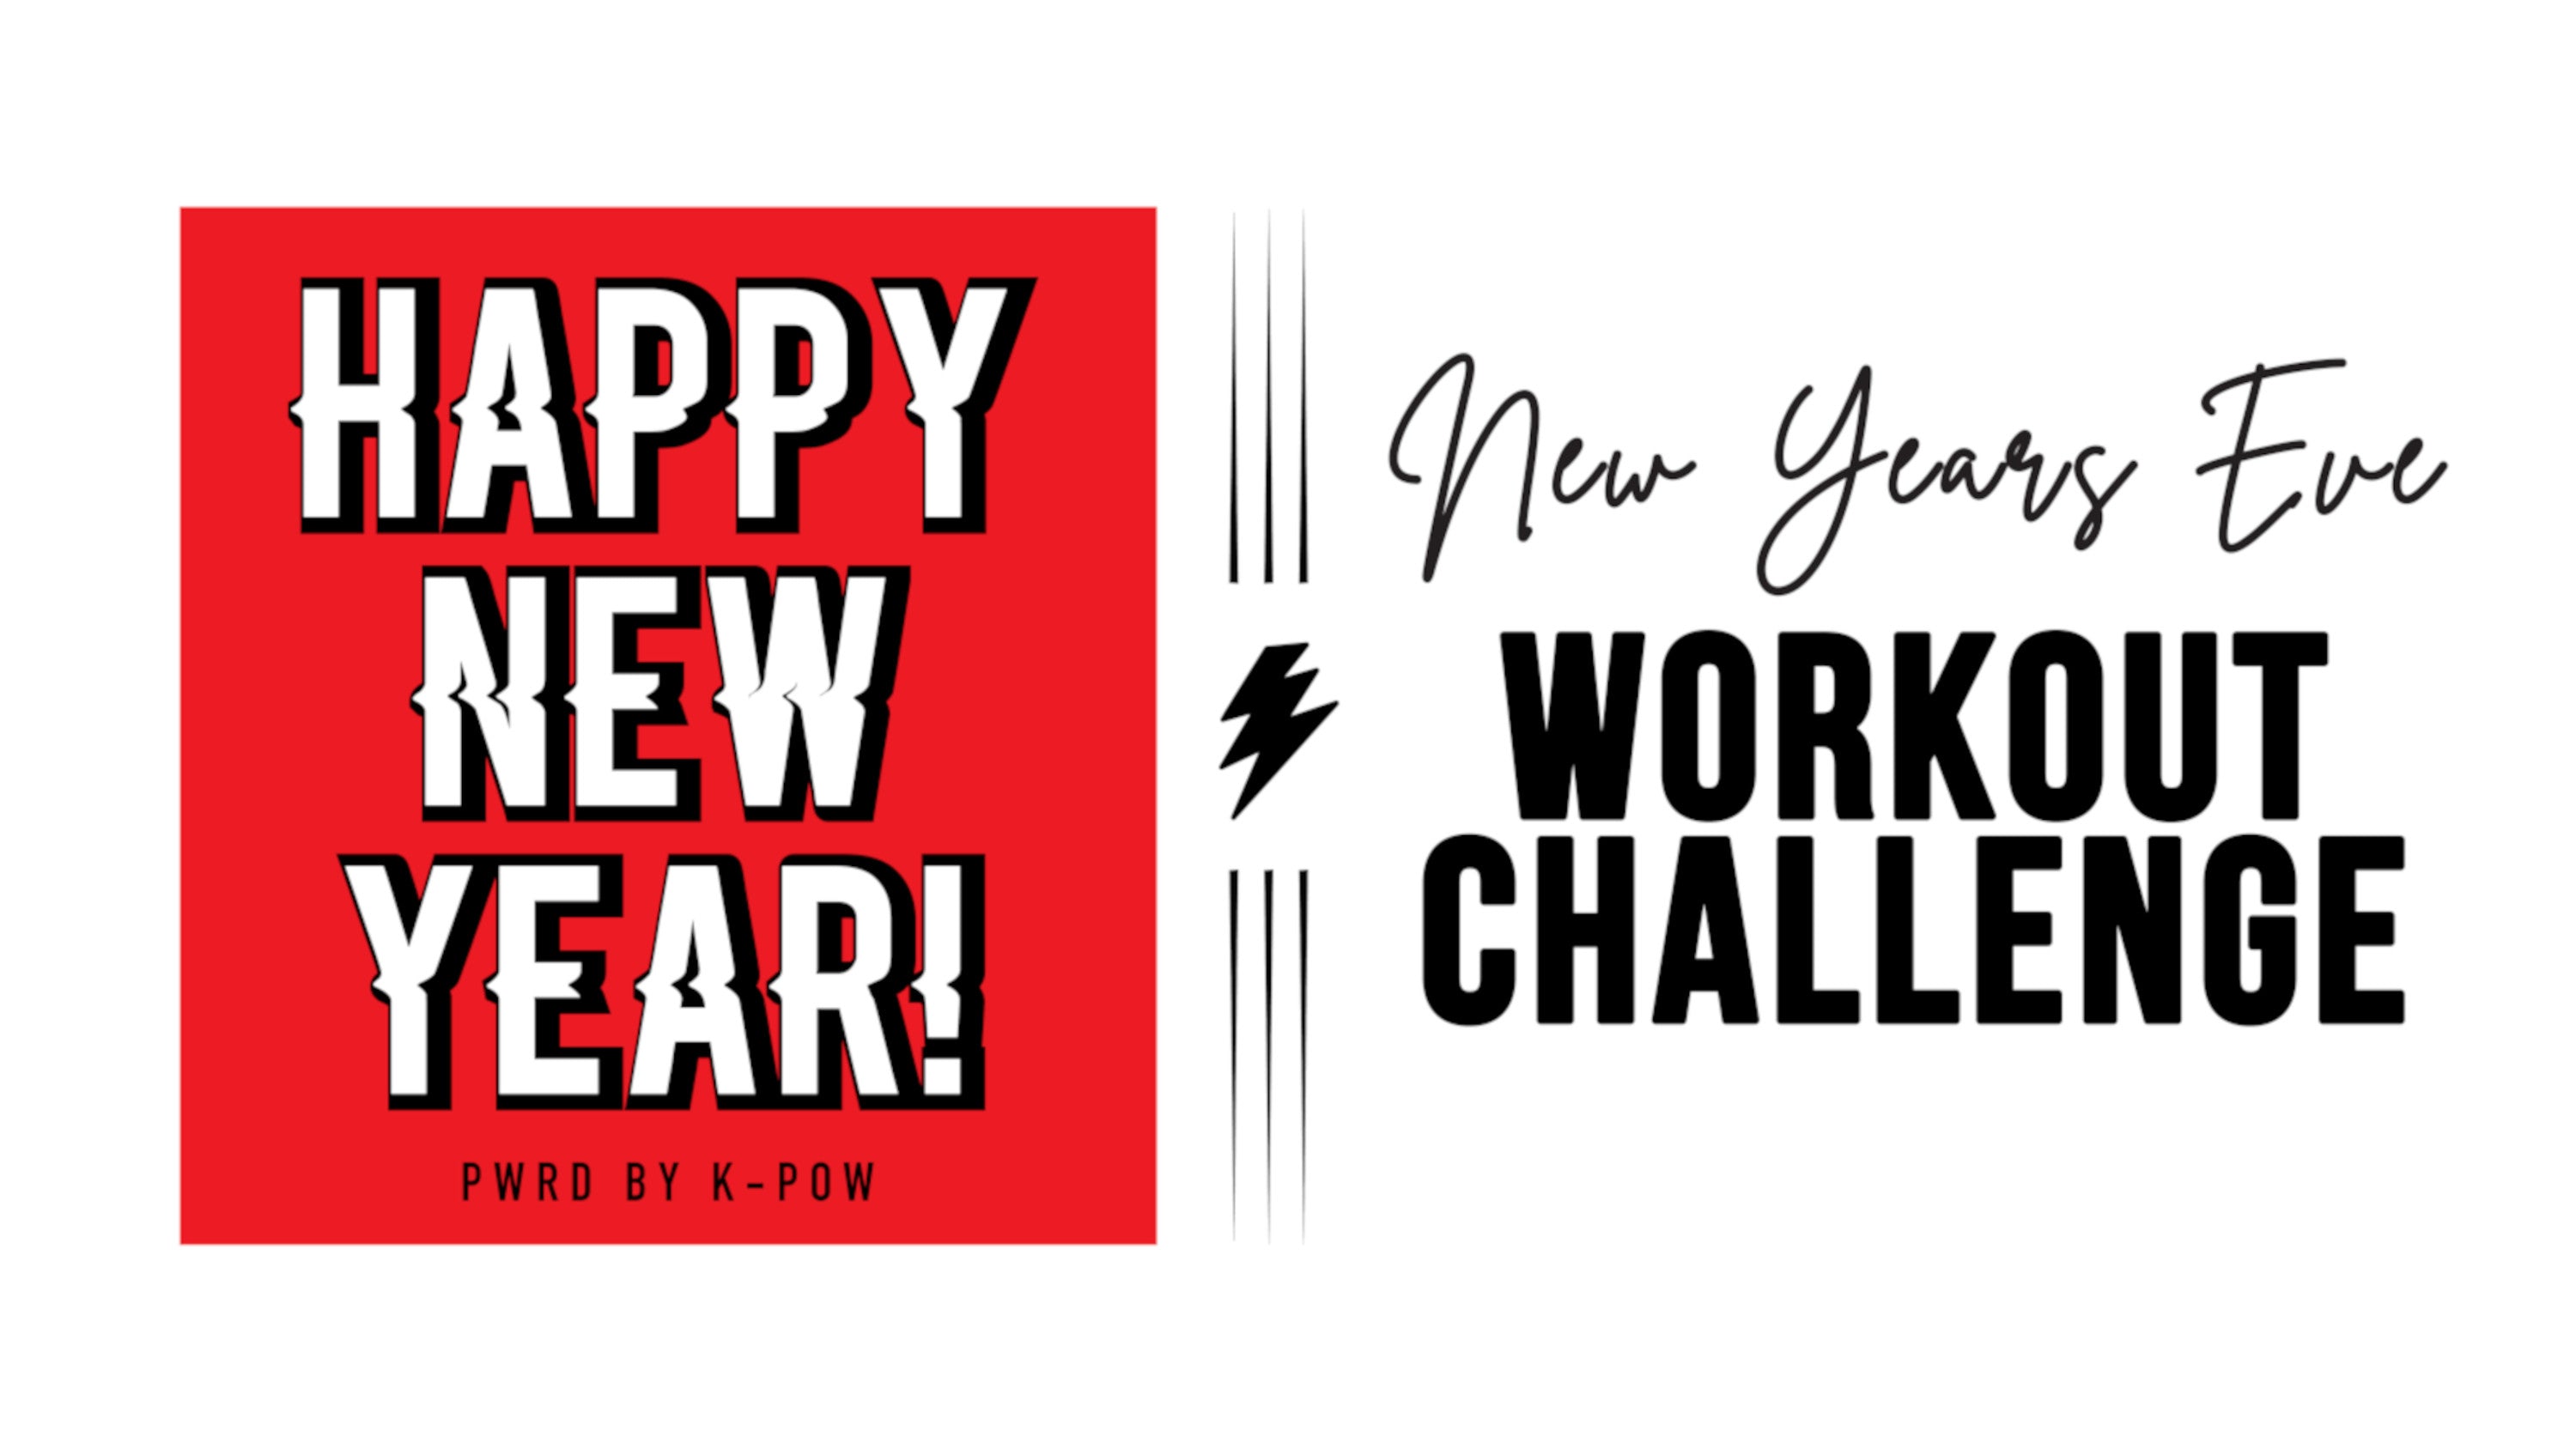 Fitness challenge ideas to start the new year strong